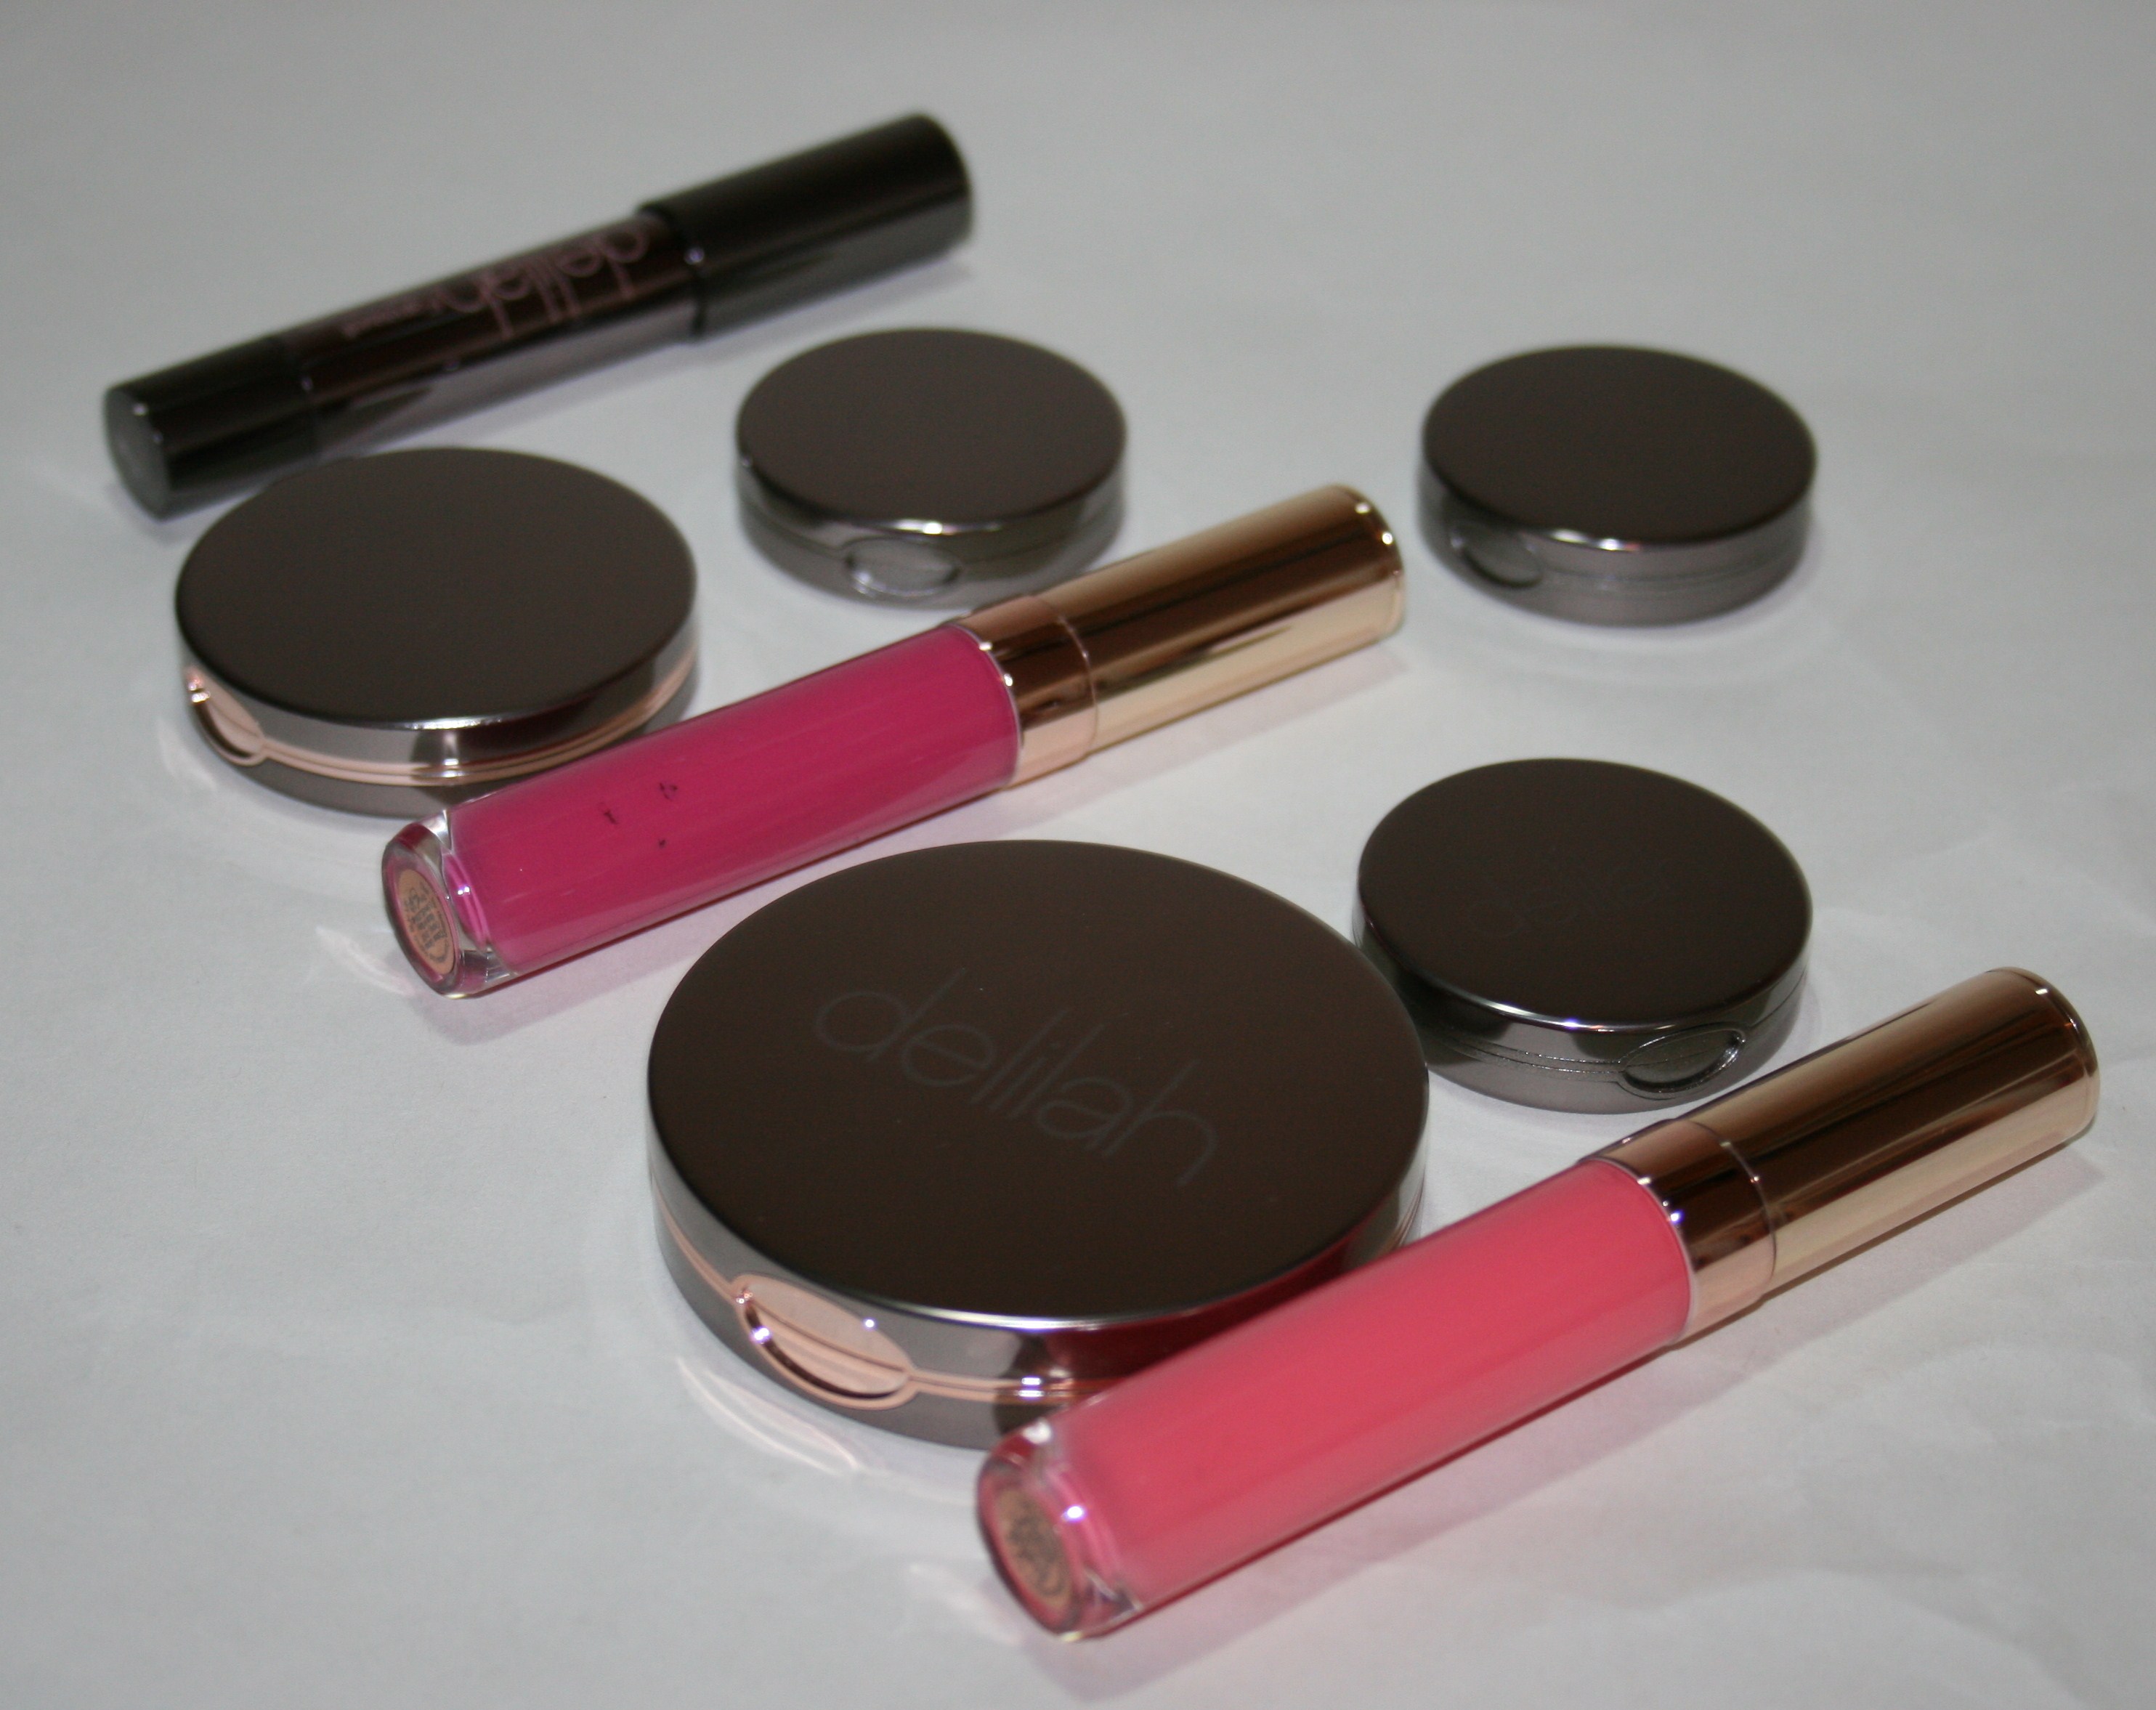 An Introduction to Delilah Cosmetics